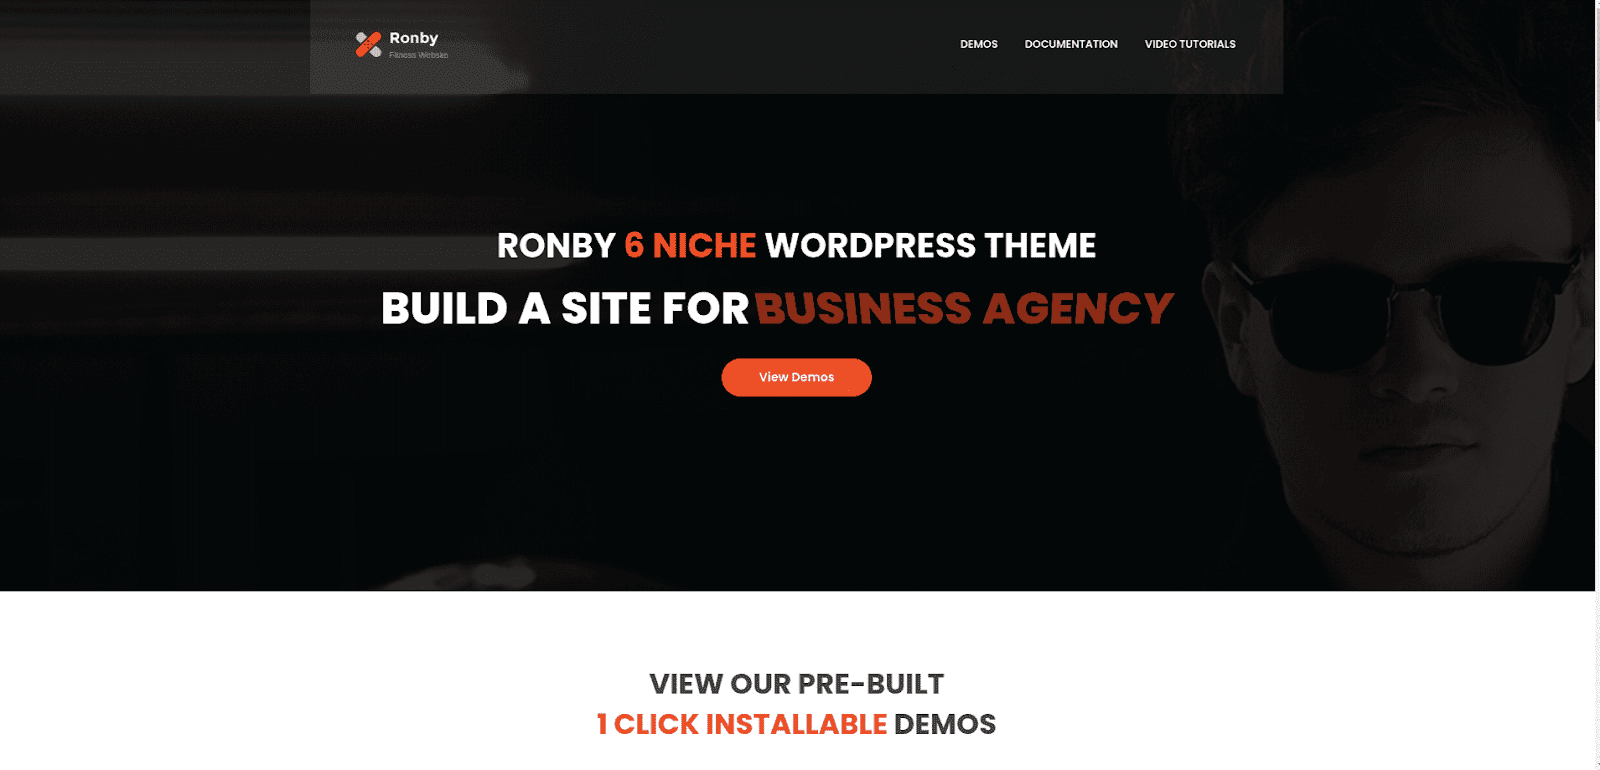 Ronby wp theme